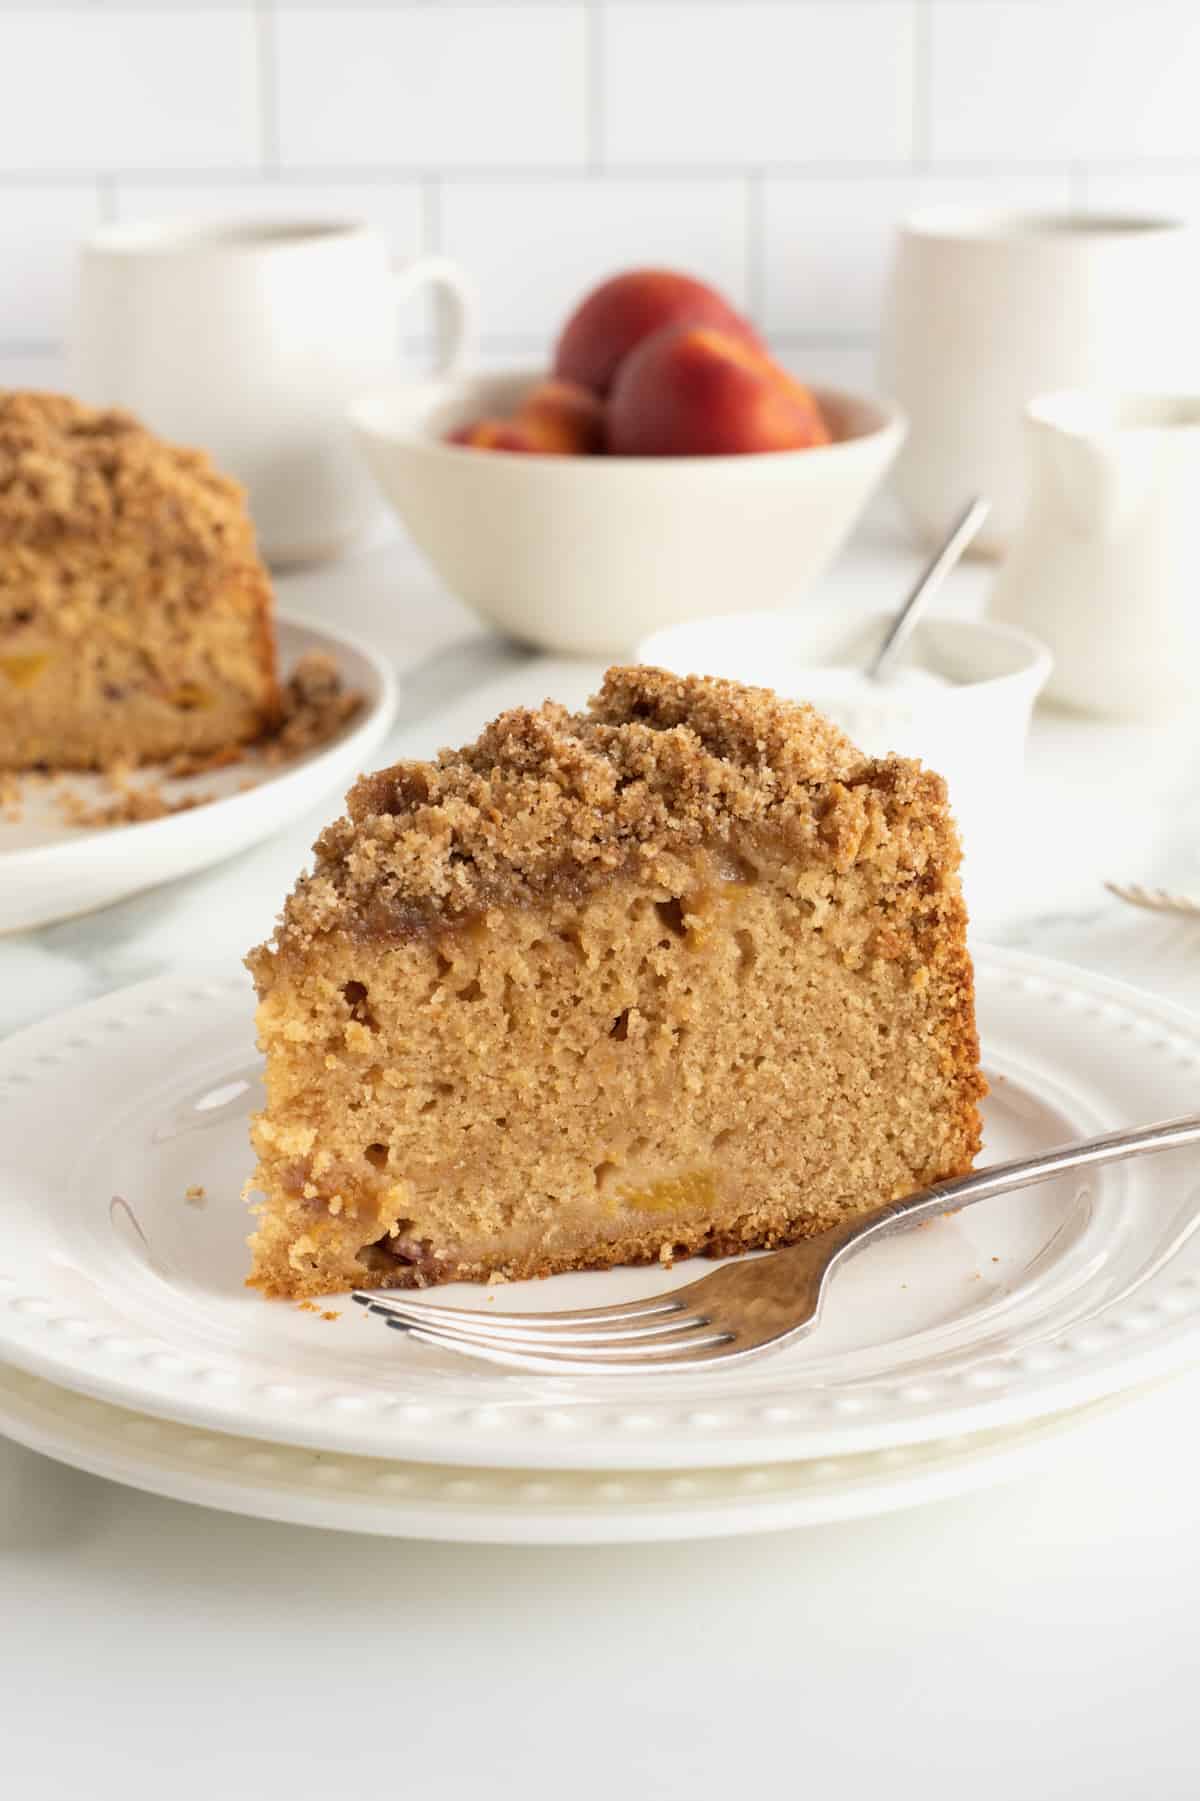 A slice of peach coffee cake on a white plate with a fork.